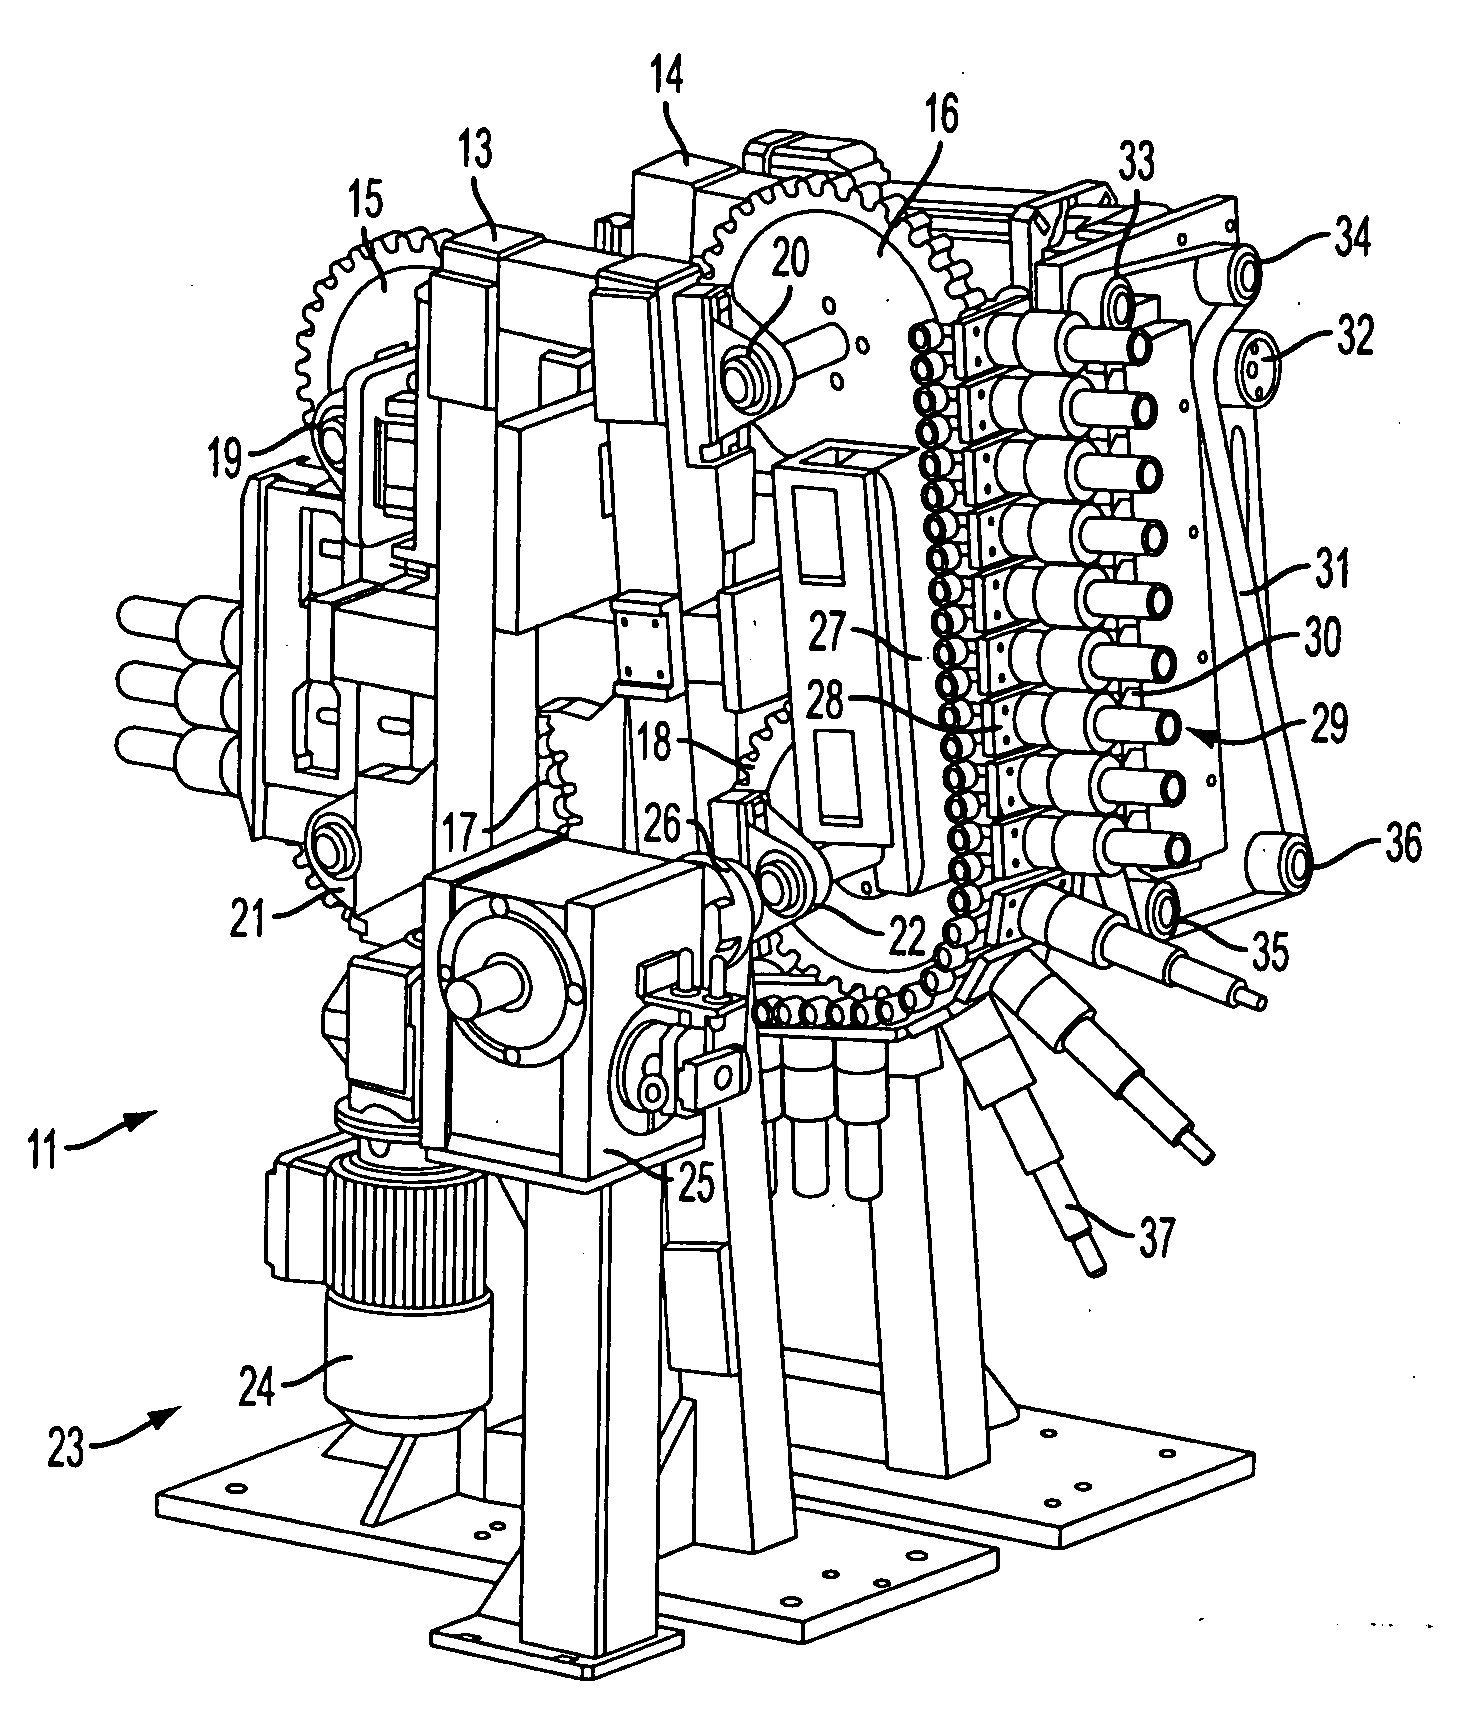 Process of and device for induction-hardening helical springs